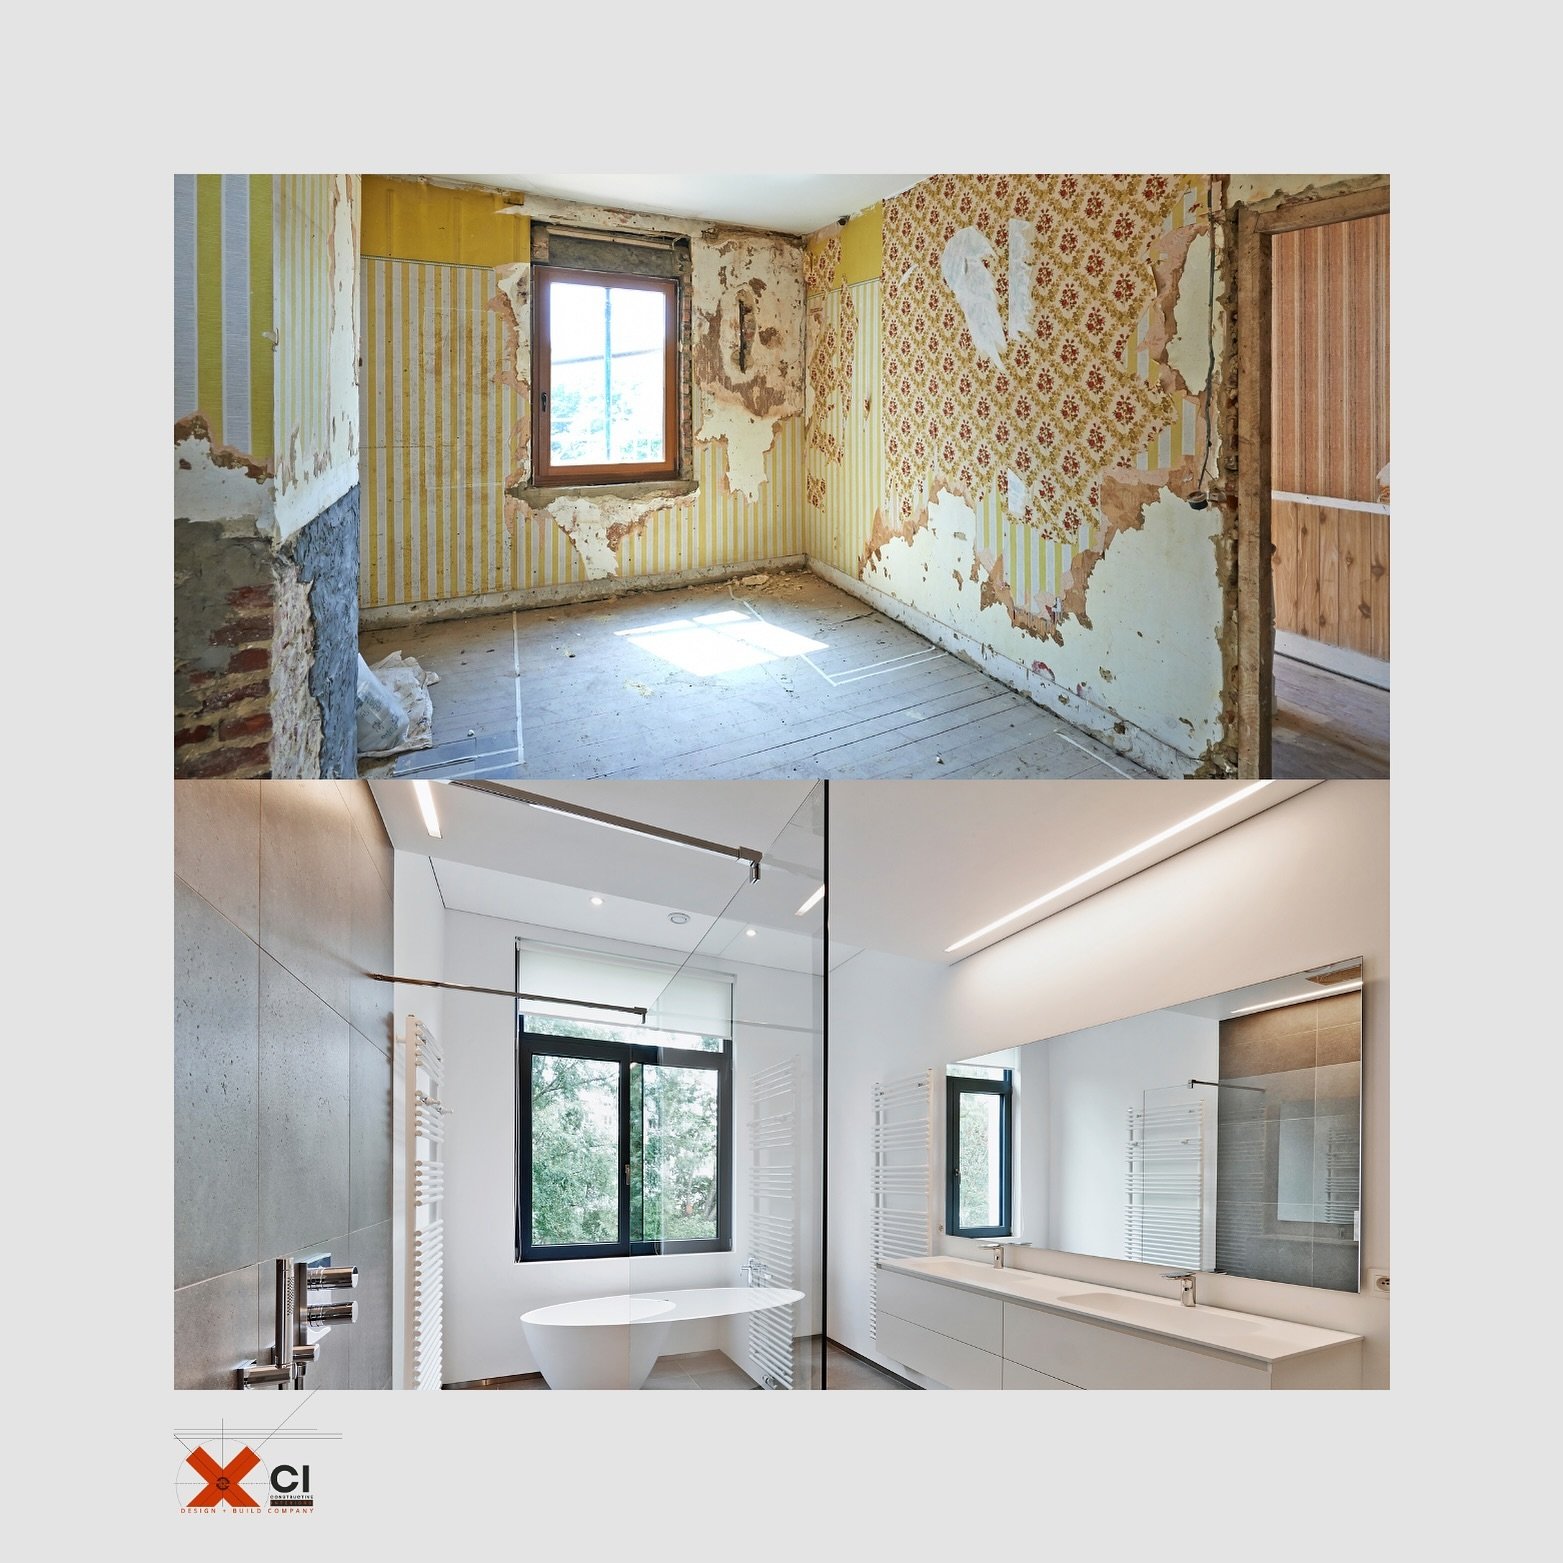 🛁 Bathroom remodel project, before and after .
Design + Build
From outdated to outstanding! 🏚️➡️🏡 We&rsquo;ll take you through a showcase of before-and-after projects, revealing the artistry of design and the impact of strategic renovations. From 